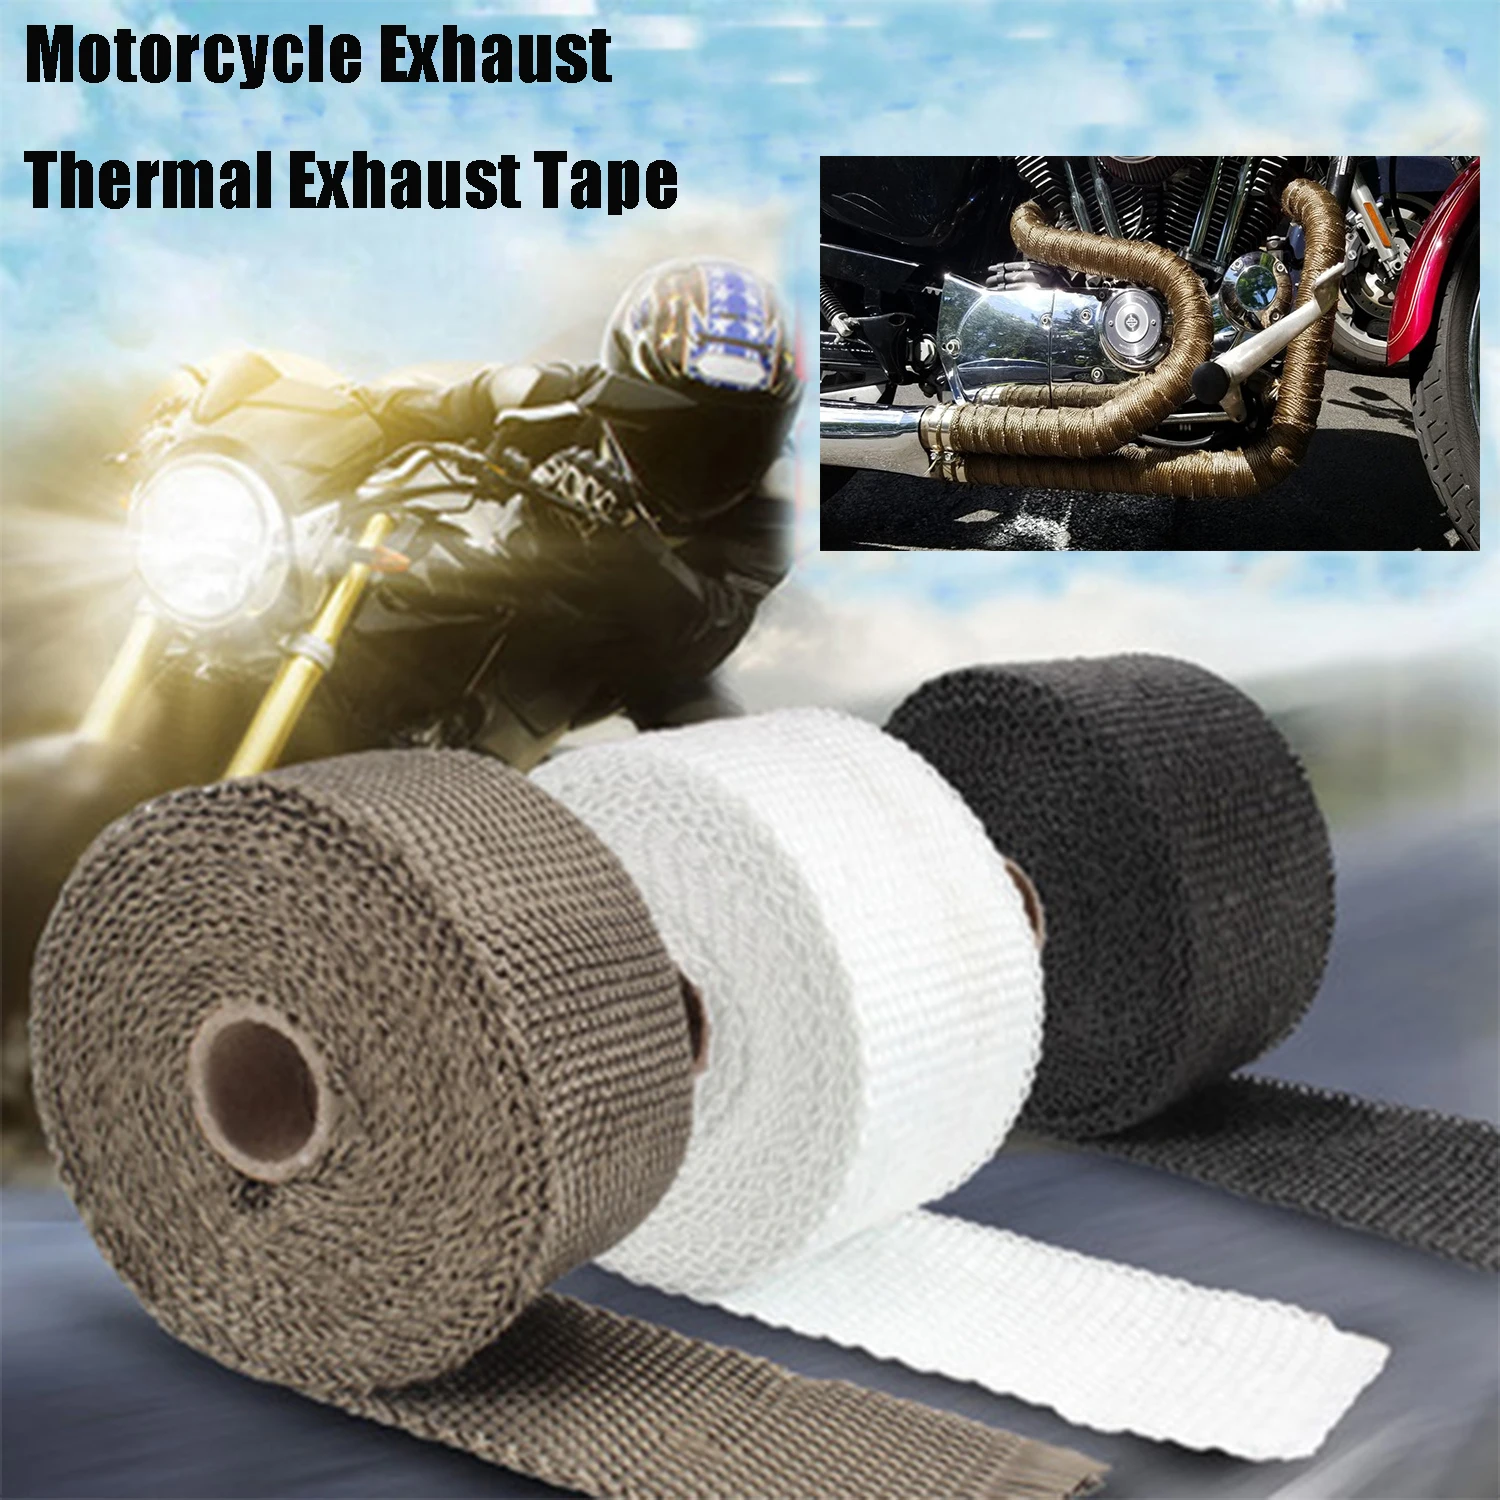 Car Motorcycle Exhaust Thermal Exhaust Tape Exhaust Heat Tape Wrap Pipe Wrap Shields Manifold Header Insulation Car Accessories